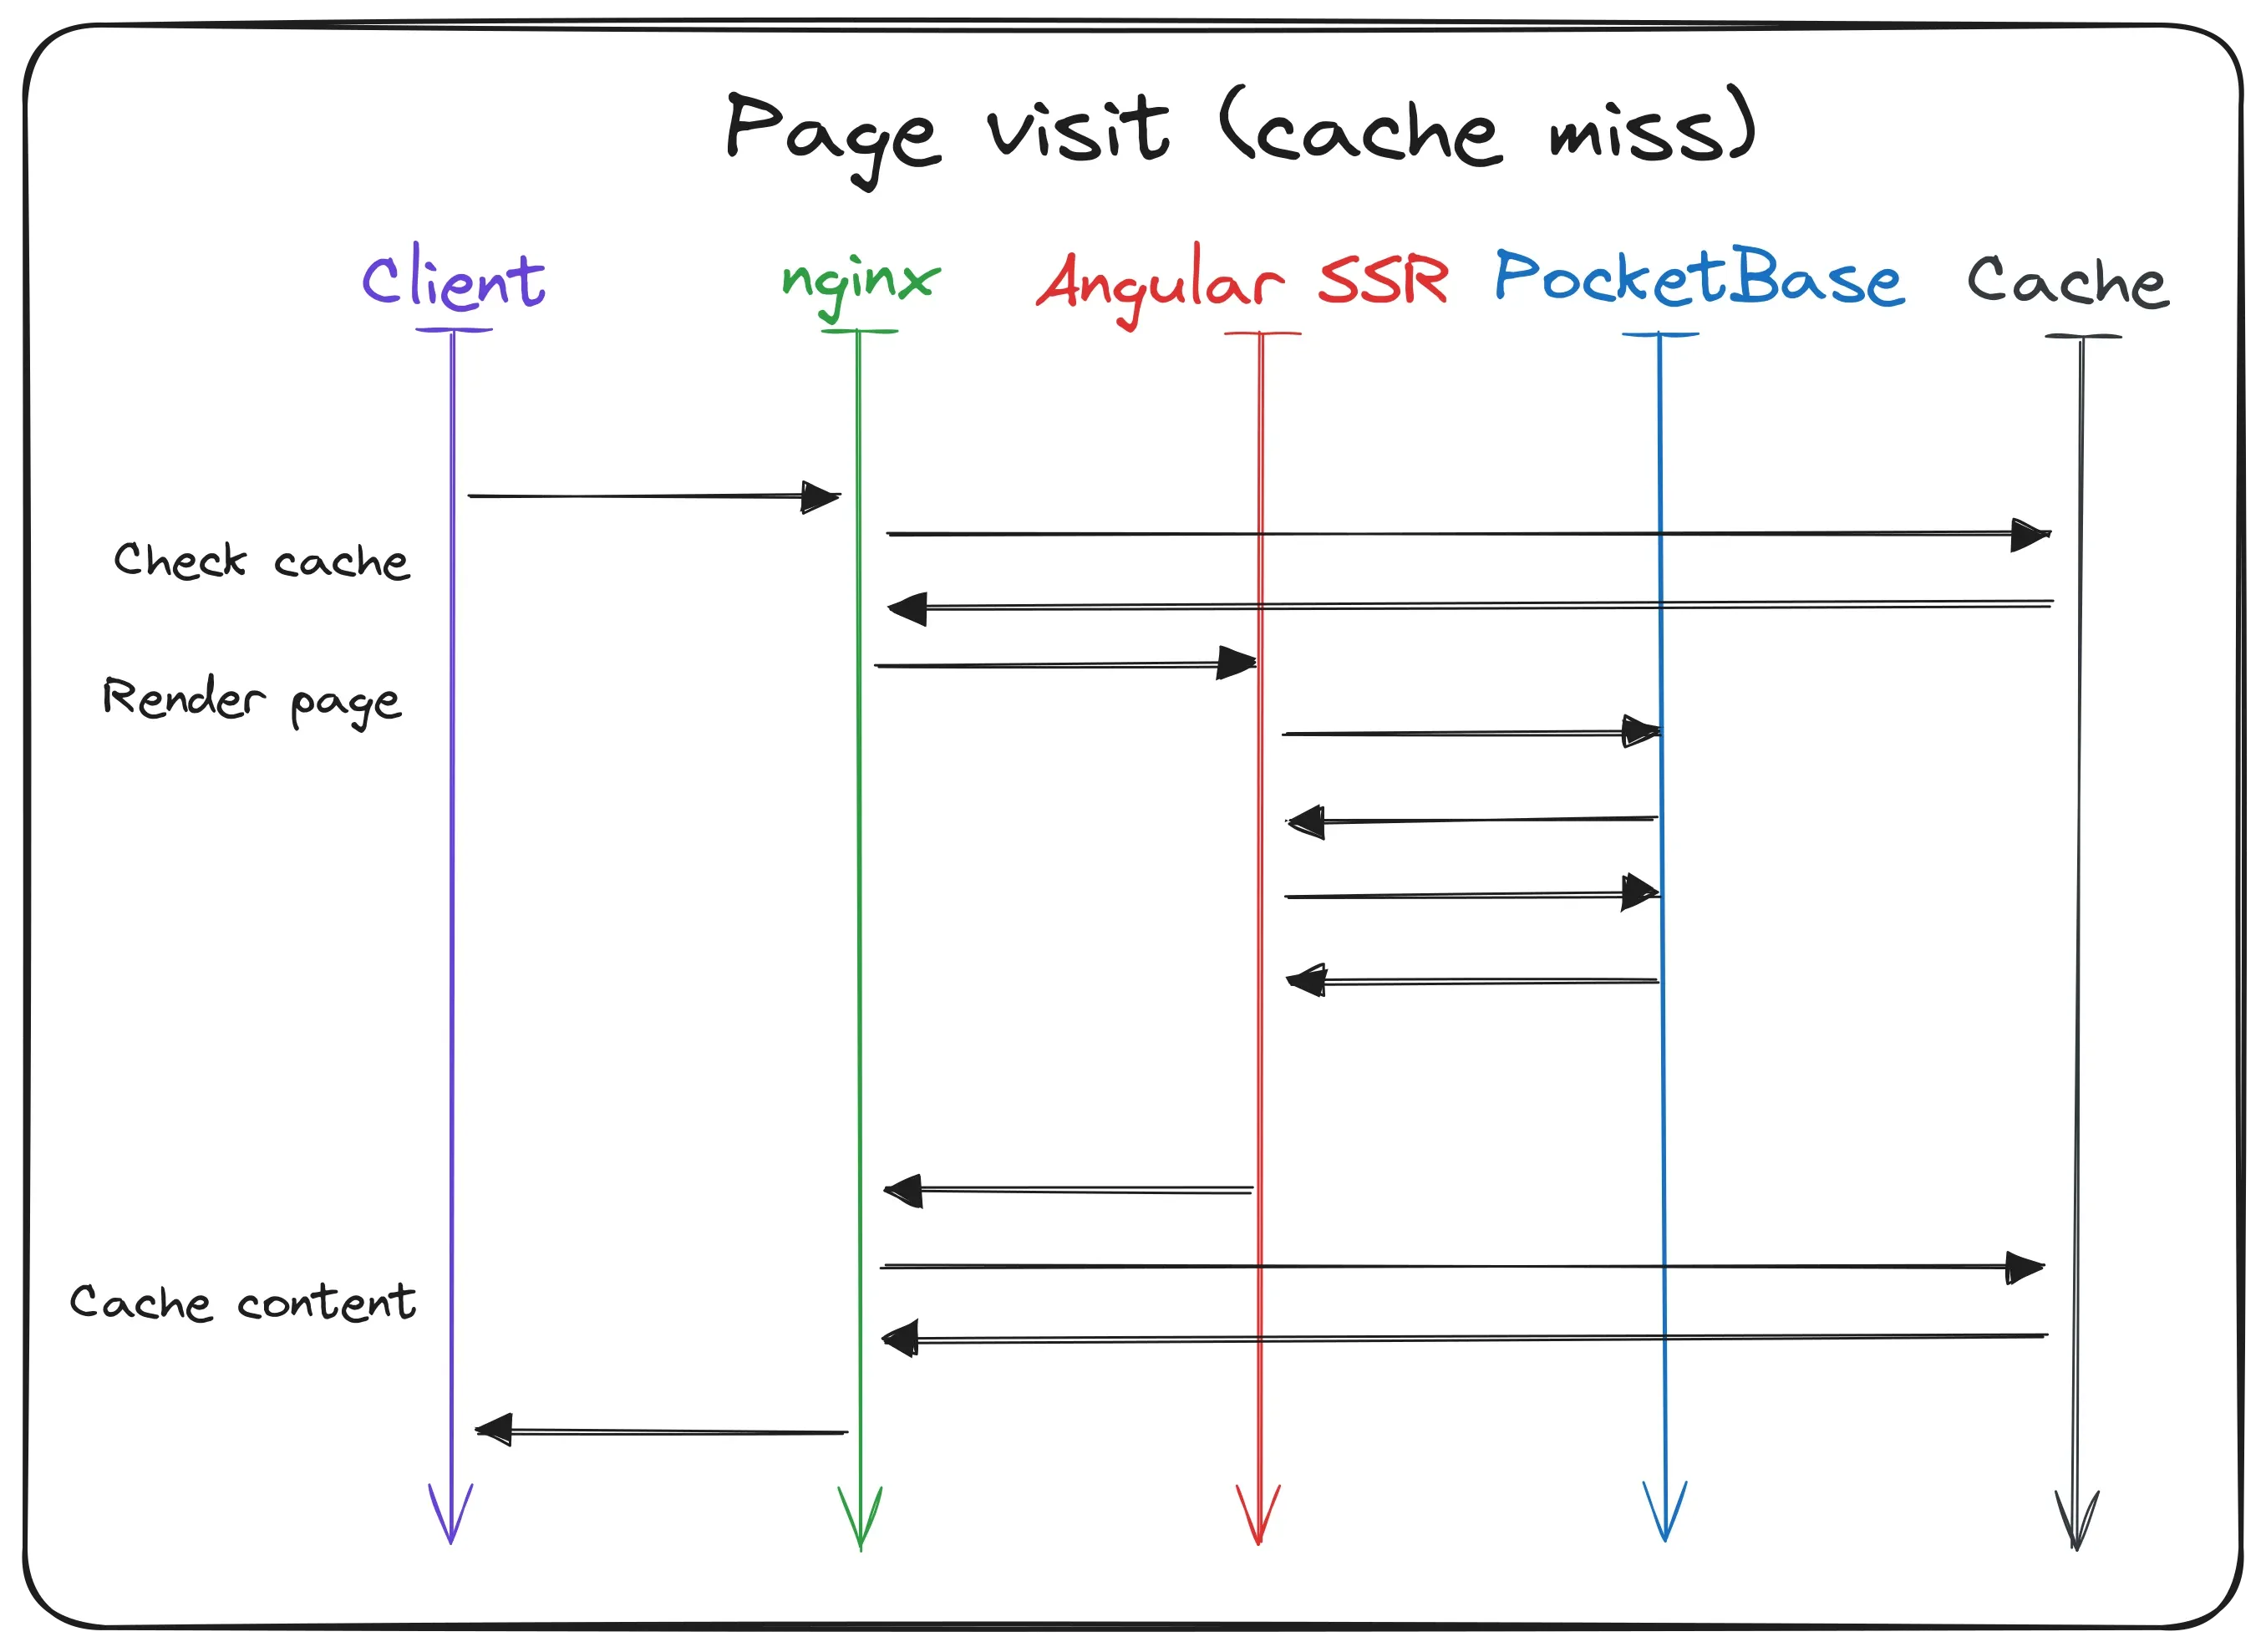 Traffic flow when the requested page is not in the cache